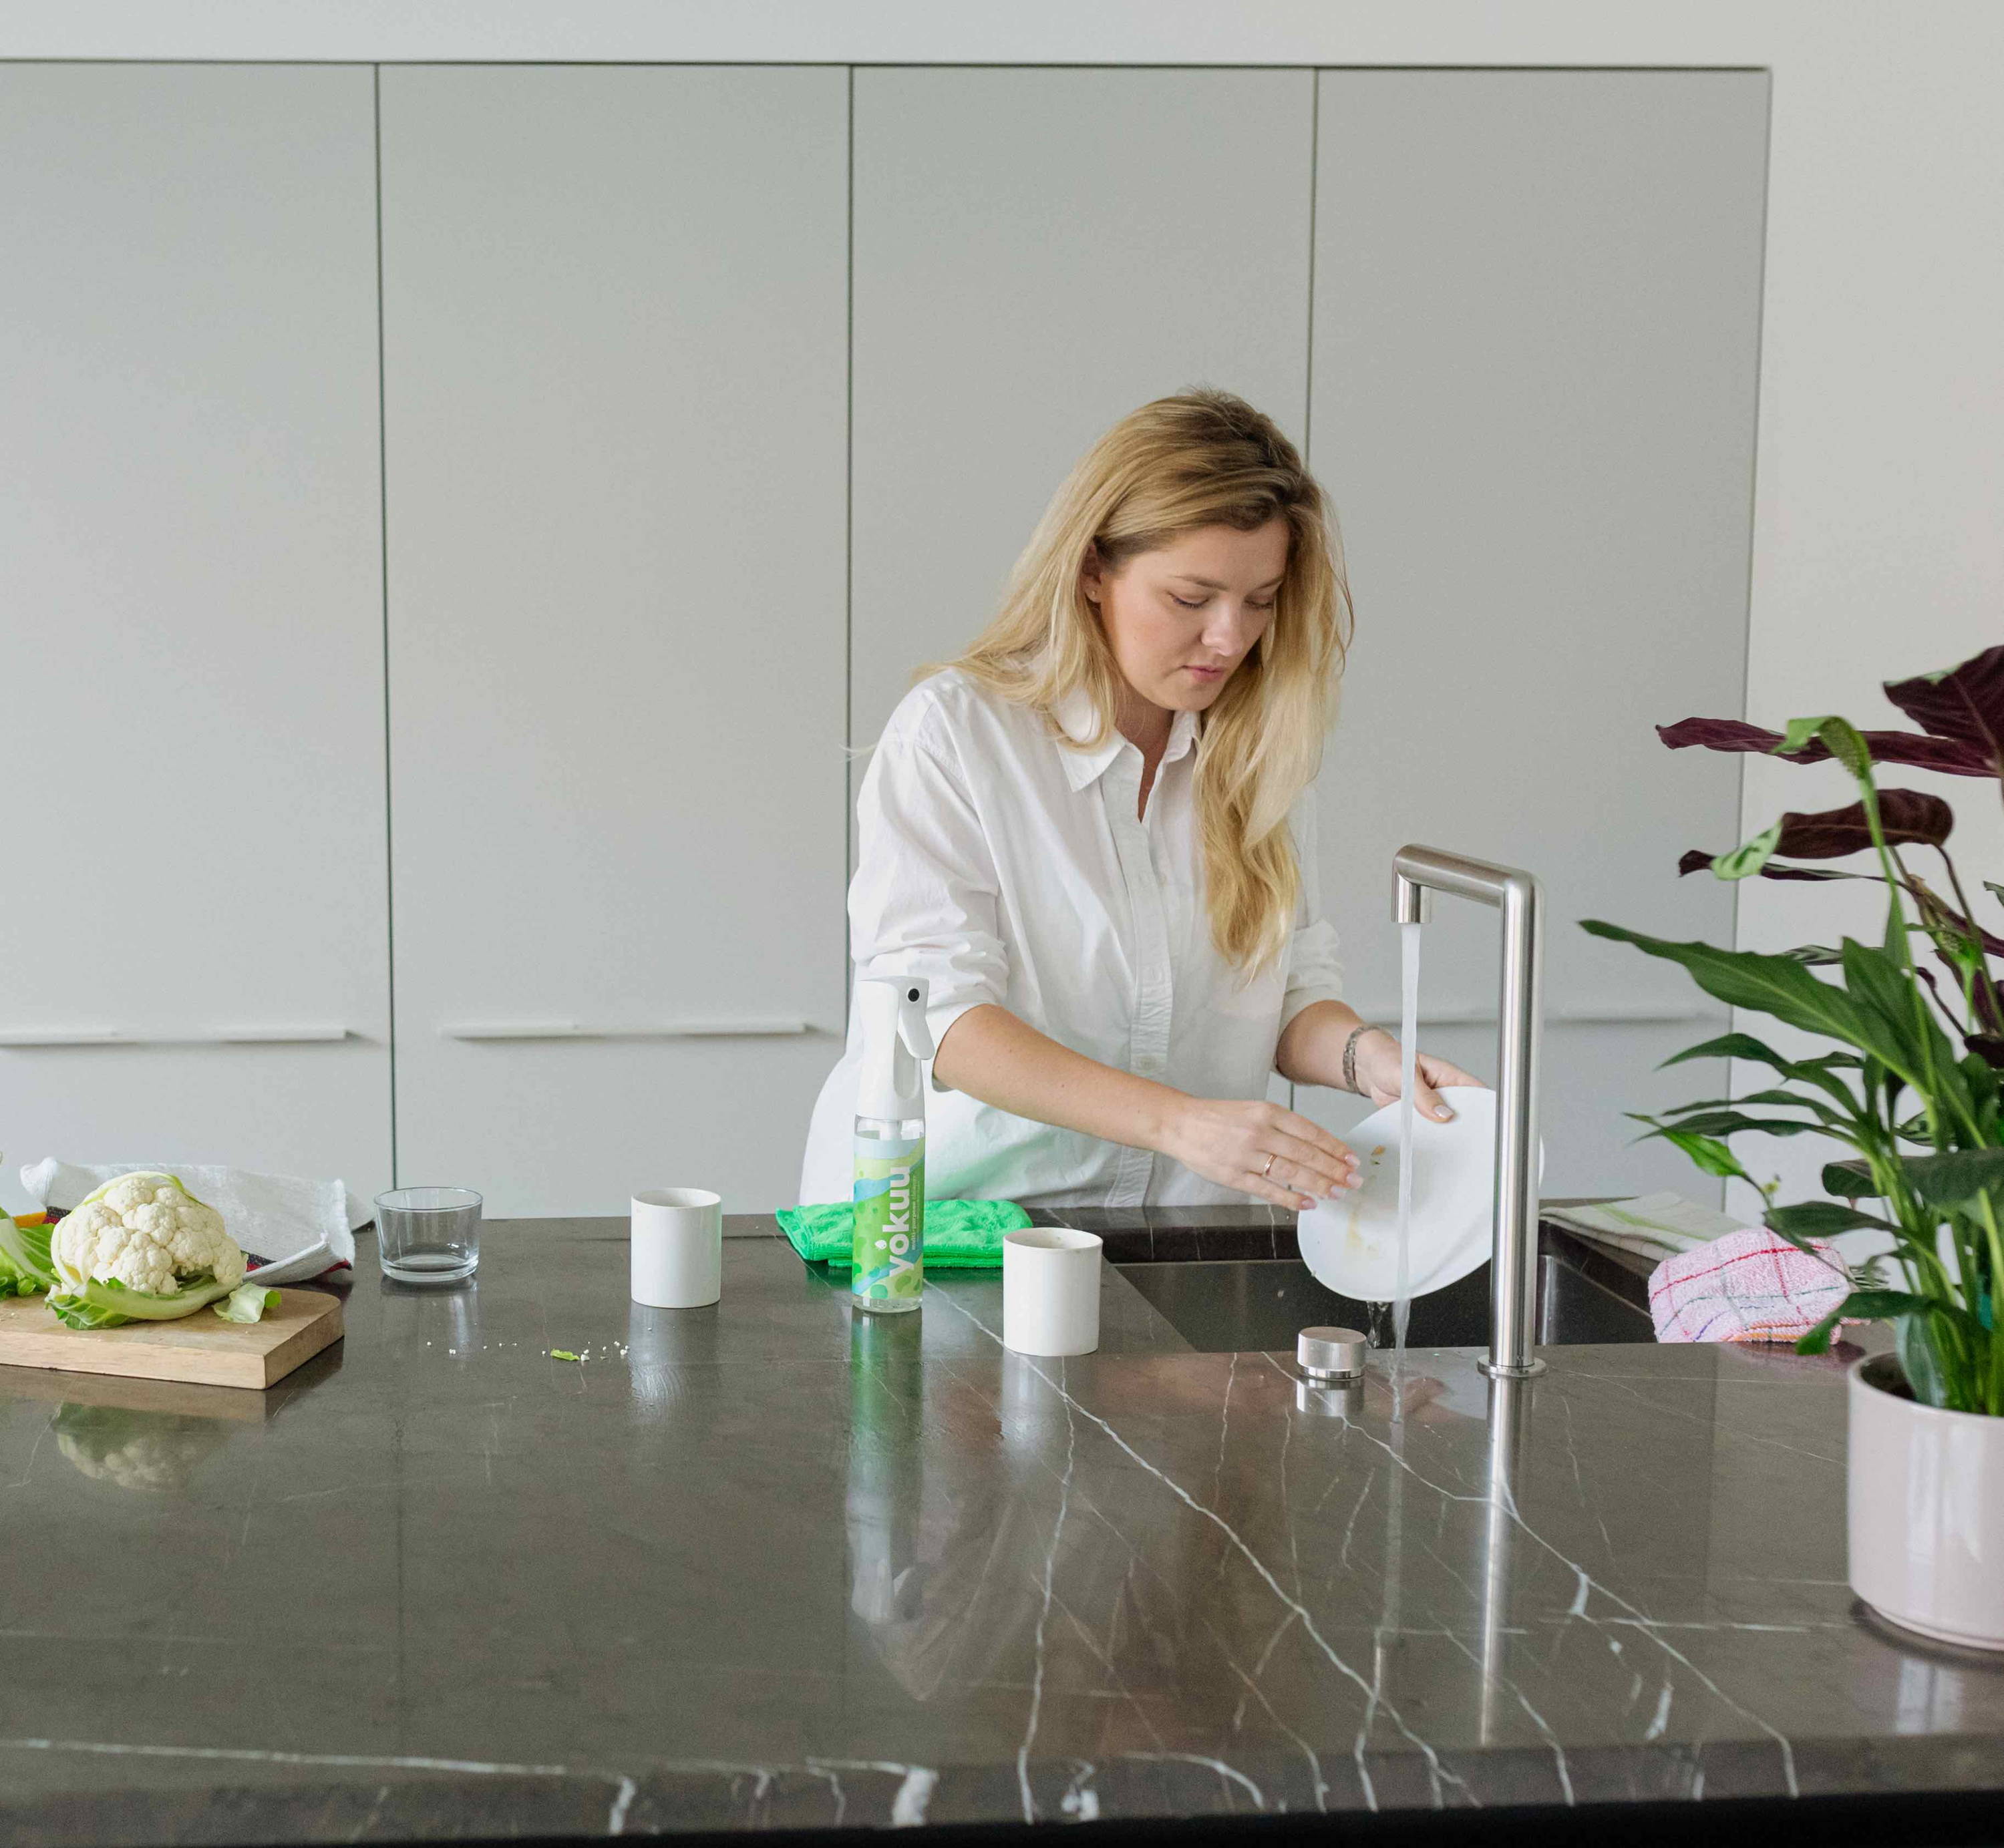 Blonde woman in a kitchen running a plate under the tap. A variety of vegetables are scattered on the counter beside her, and a bottle of Yokuu multi-purpose spray is visible in the background.